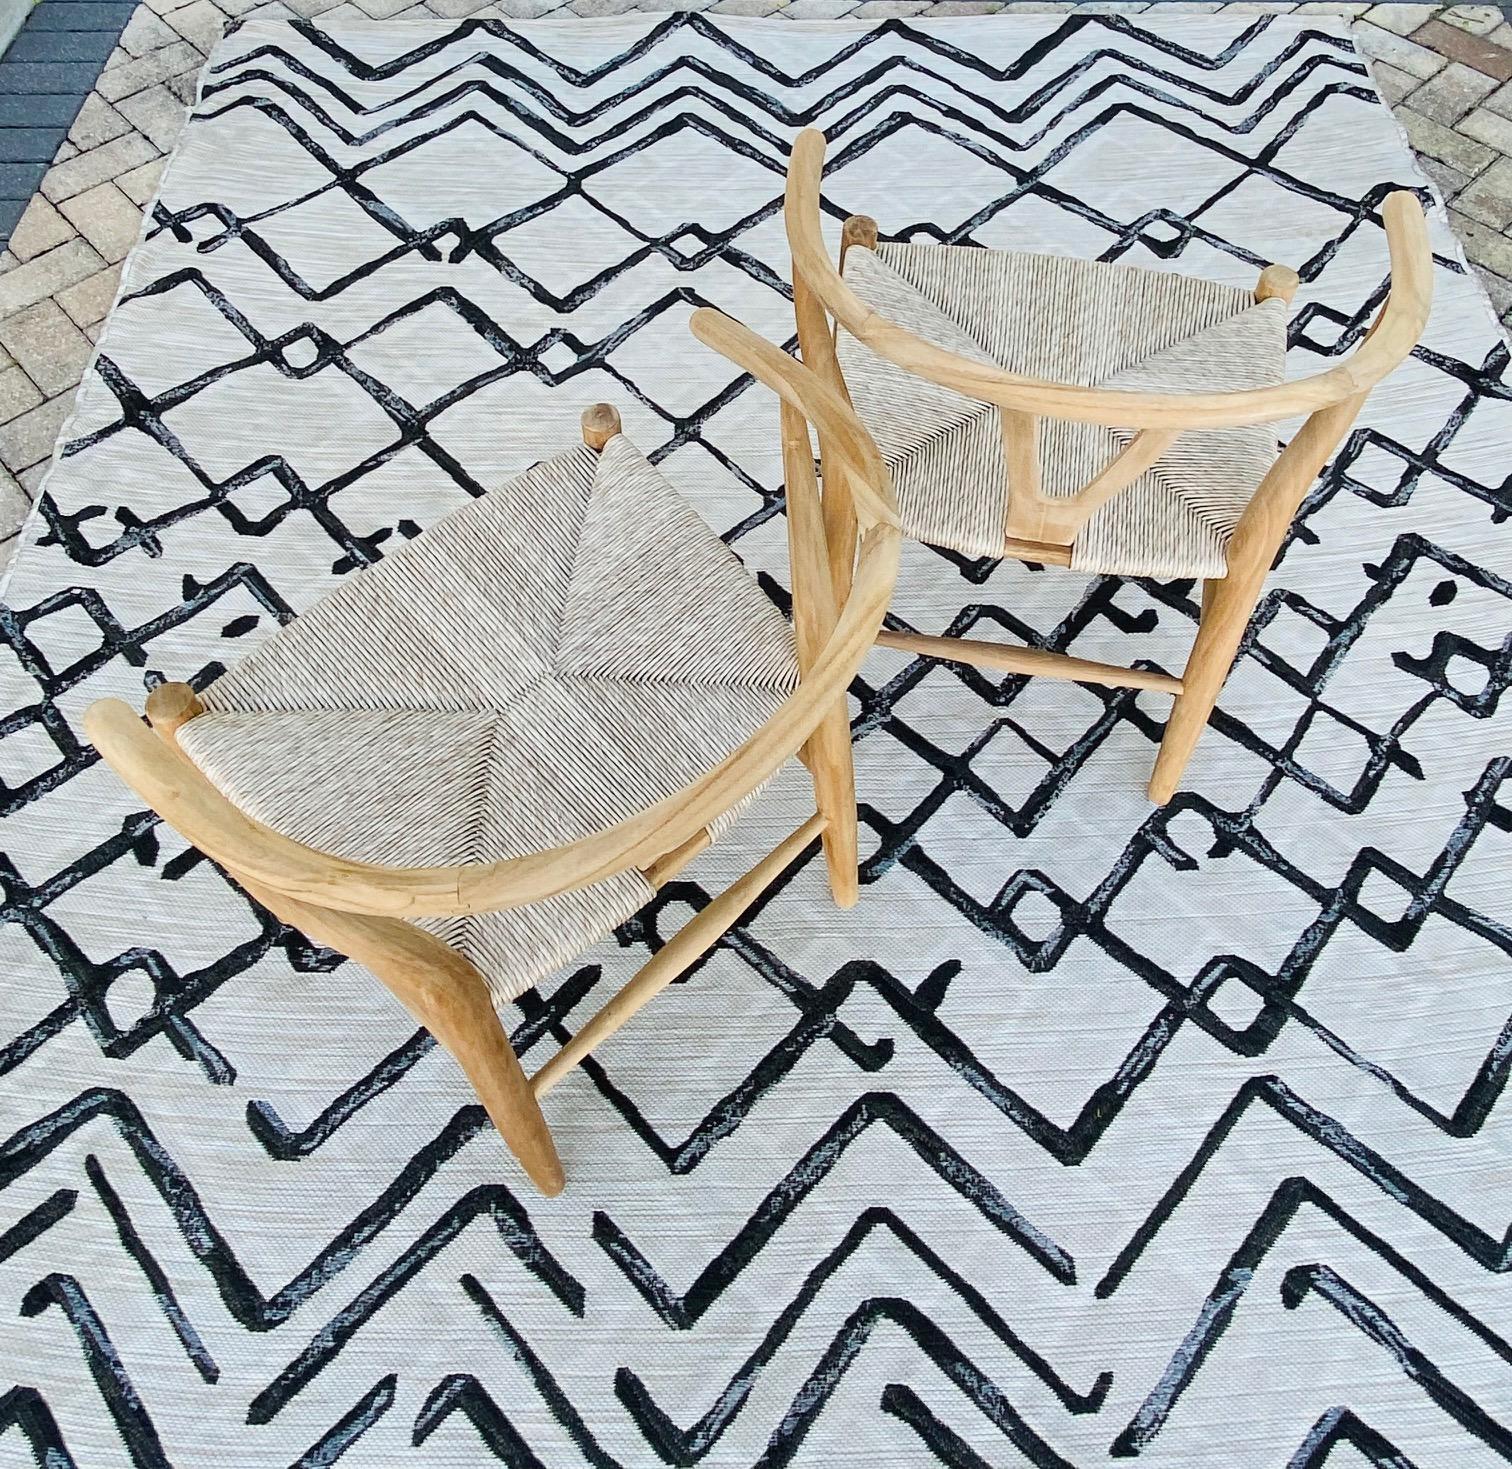 Contemporary Pair of Vintage Danish Modern Chairs in Natural Teak Wood with Handwoven Seats